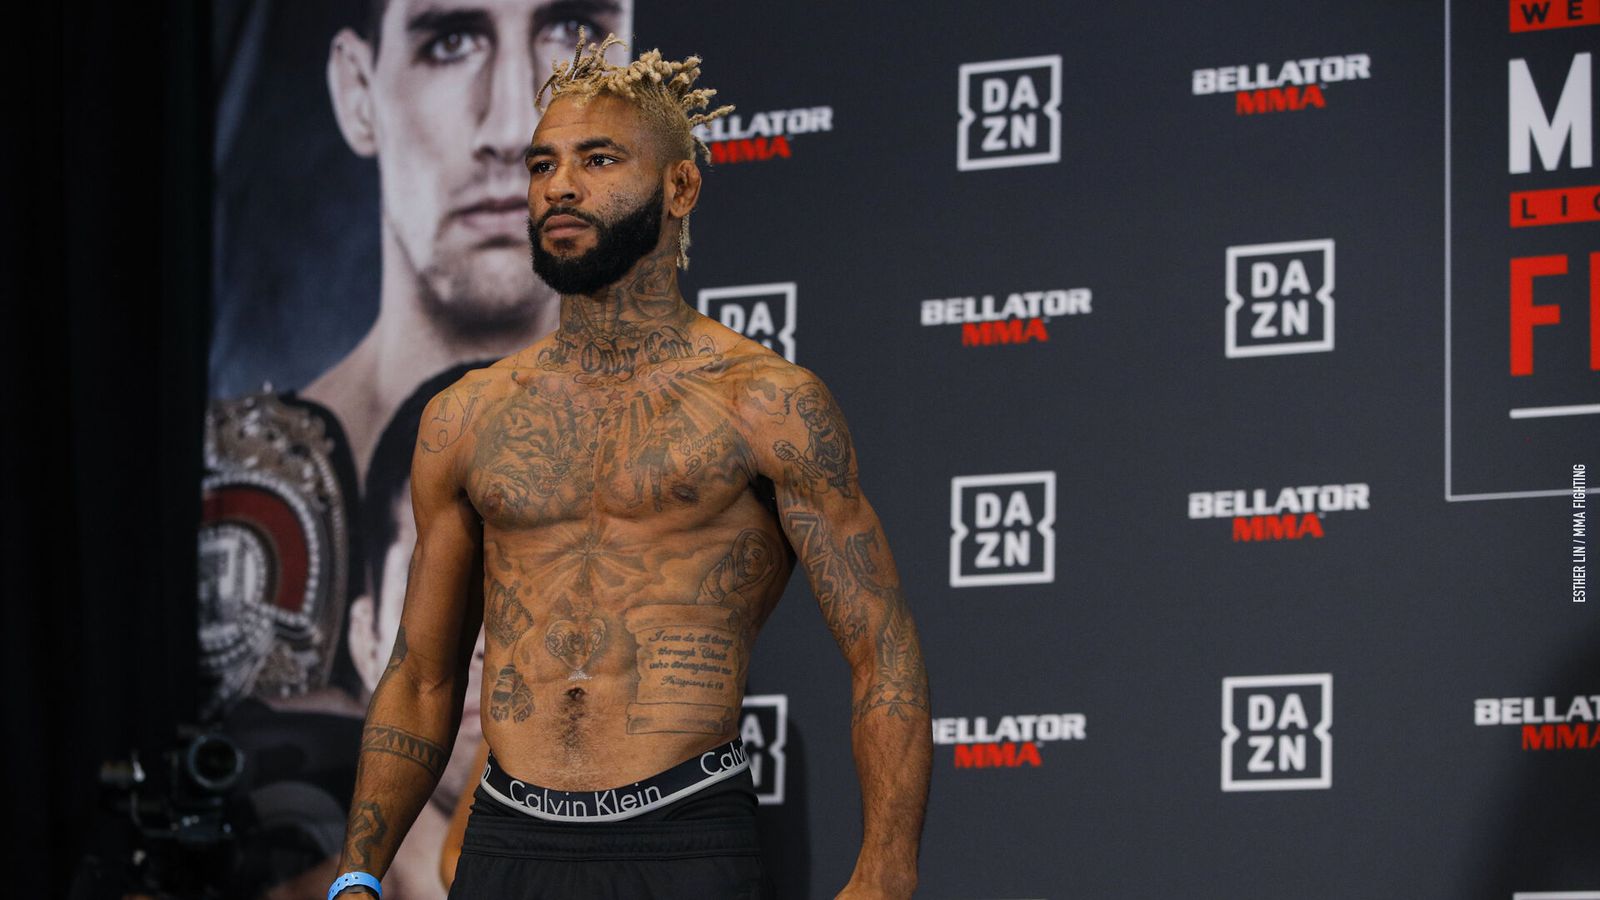 Darrion Caldwell doesn’t just want Kyoji Horiguchi’s title he’s